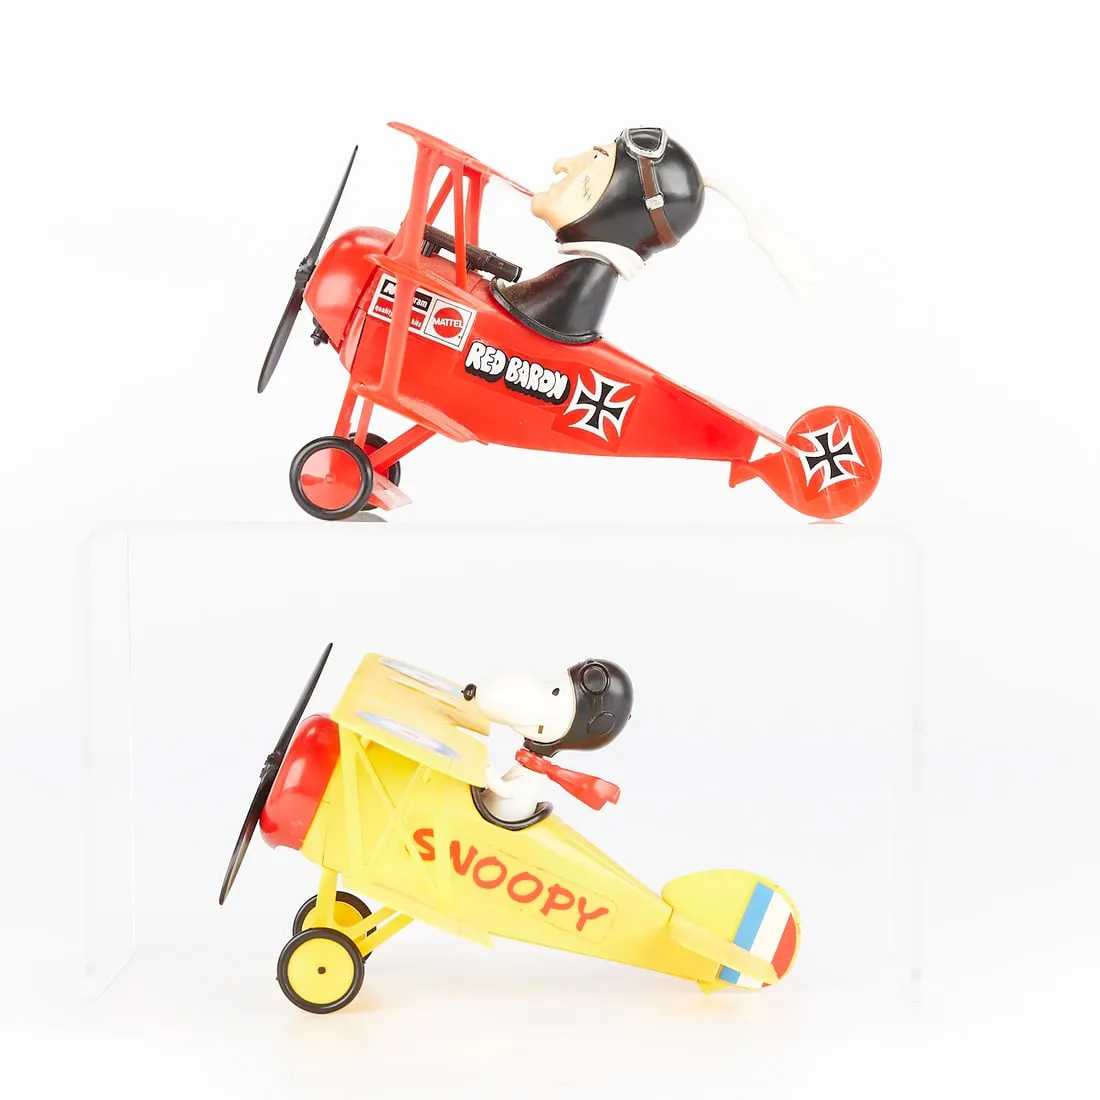 Monogram (Mattel) built-up model kits of Red Baron and Snoopy, estimated at $80-$100 at Revere.